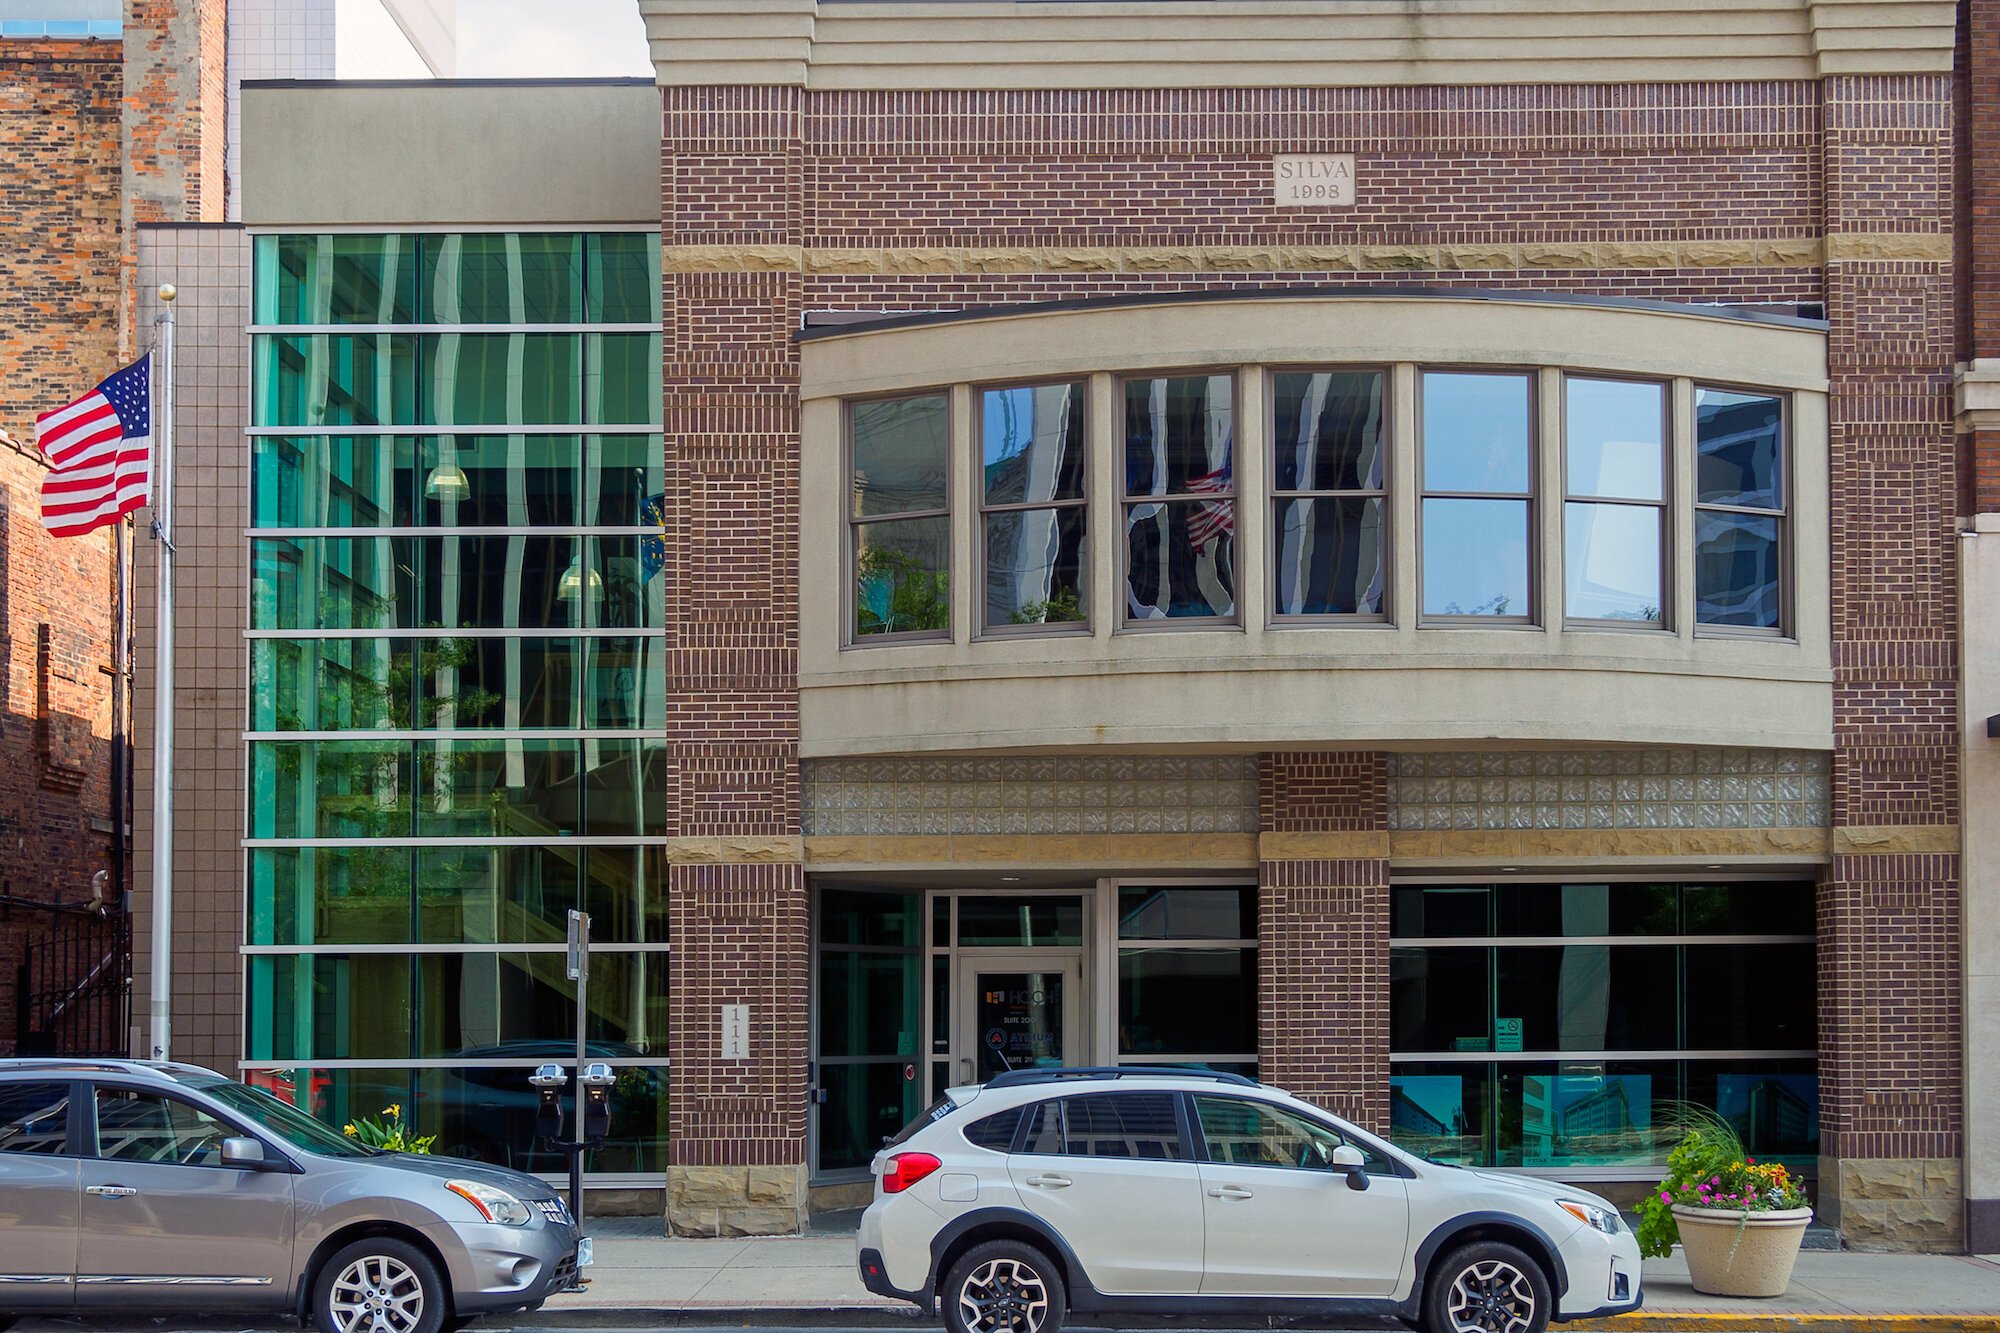 Start Fort Wayne and its coworking space Atrium are located at 111 W. Berry St., Suite 211.